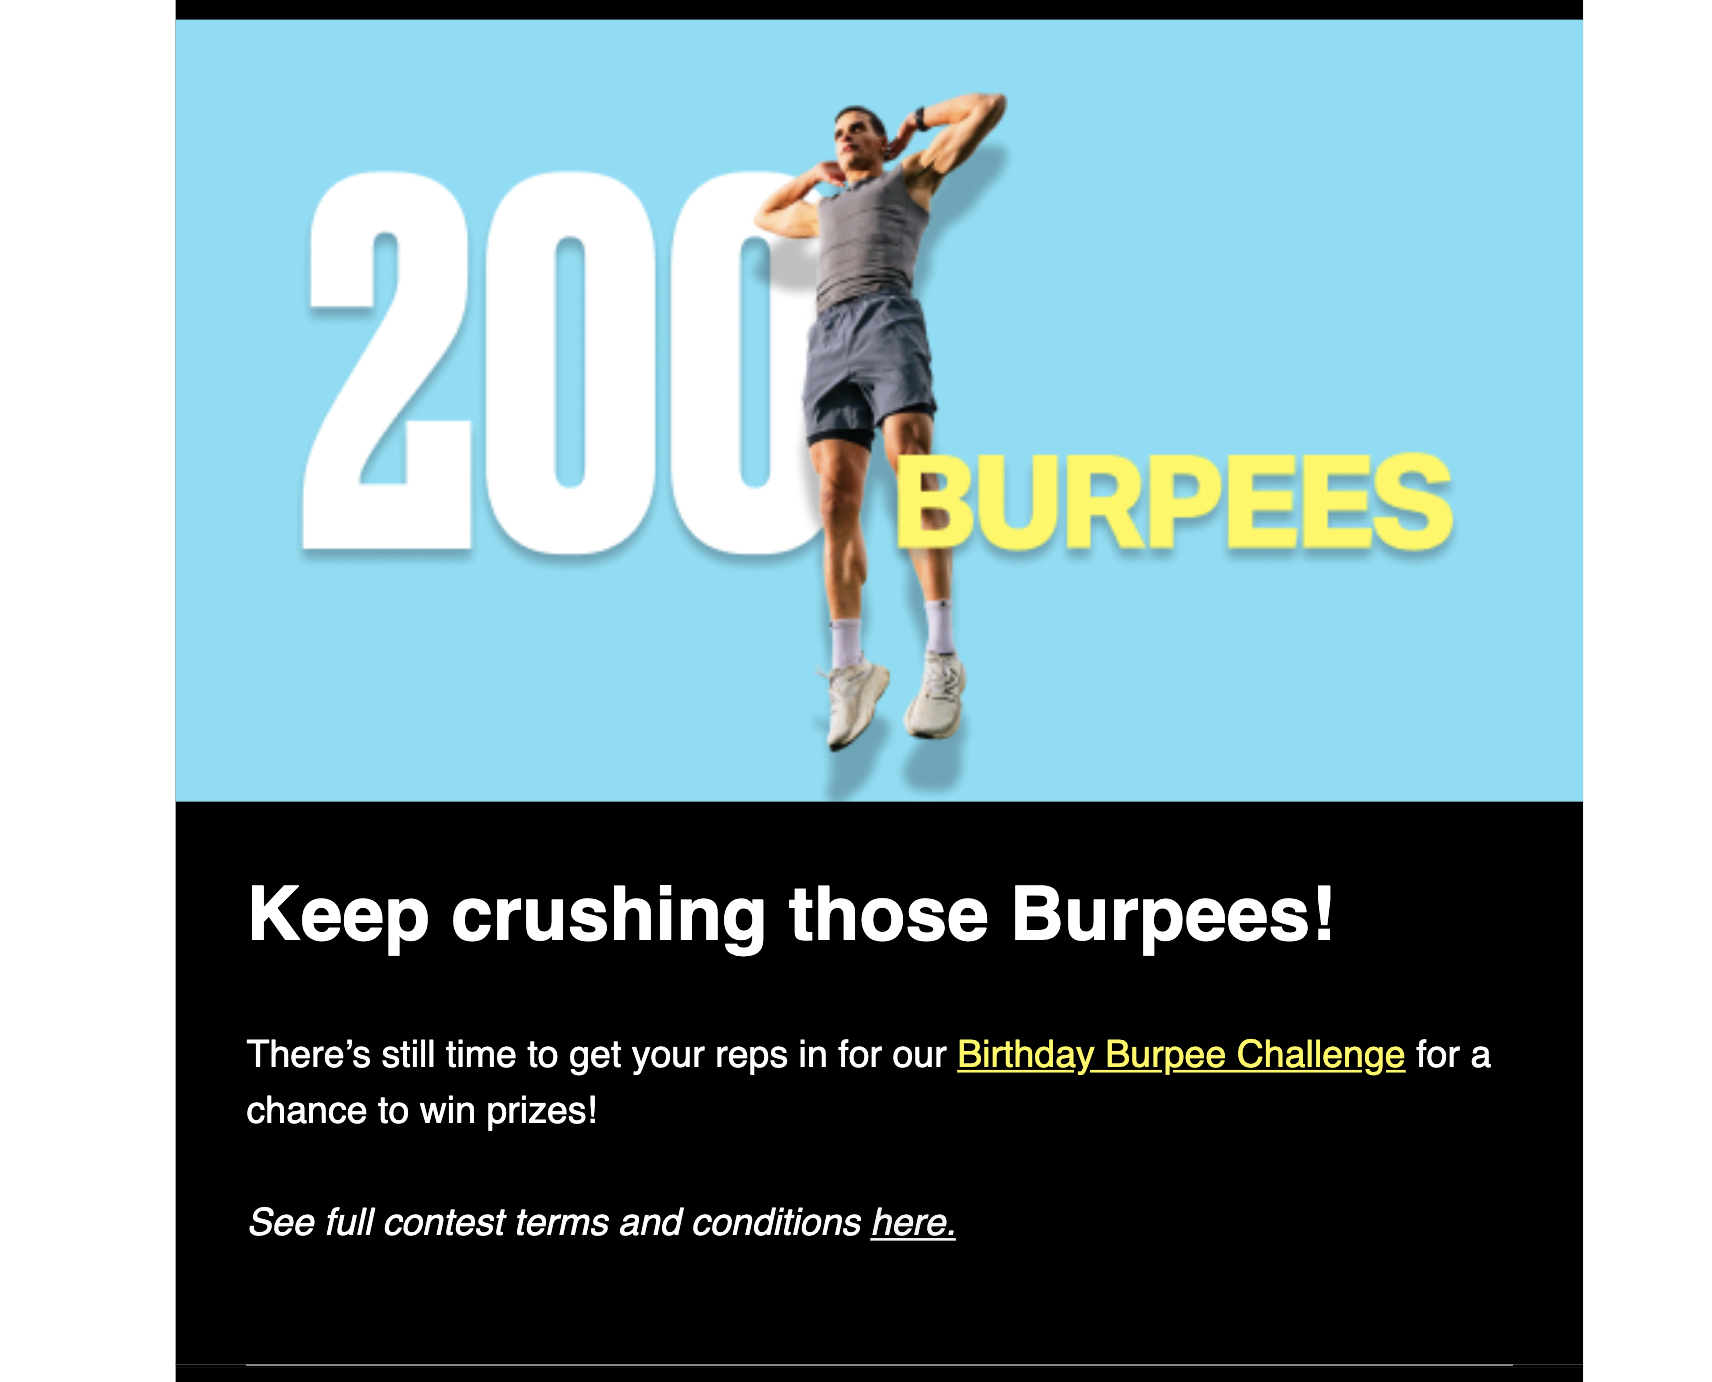 Olympic email example by Freelentics challenging subscribers with 200 burpees 